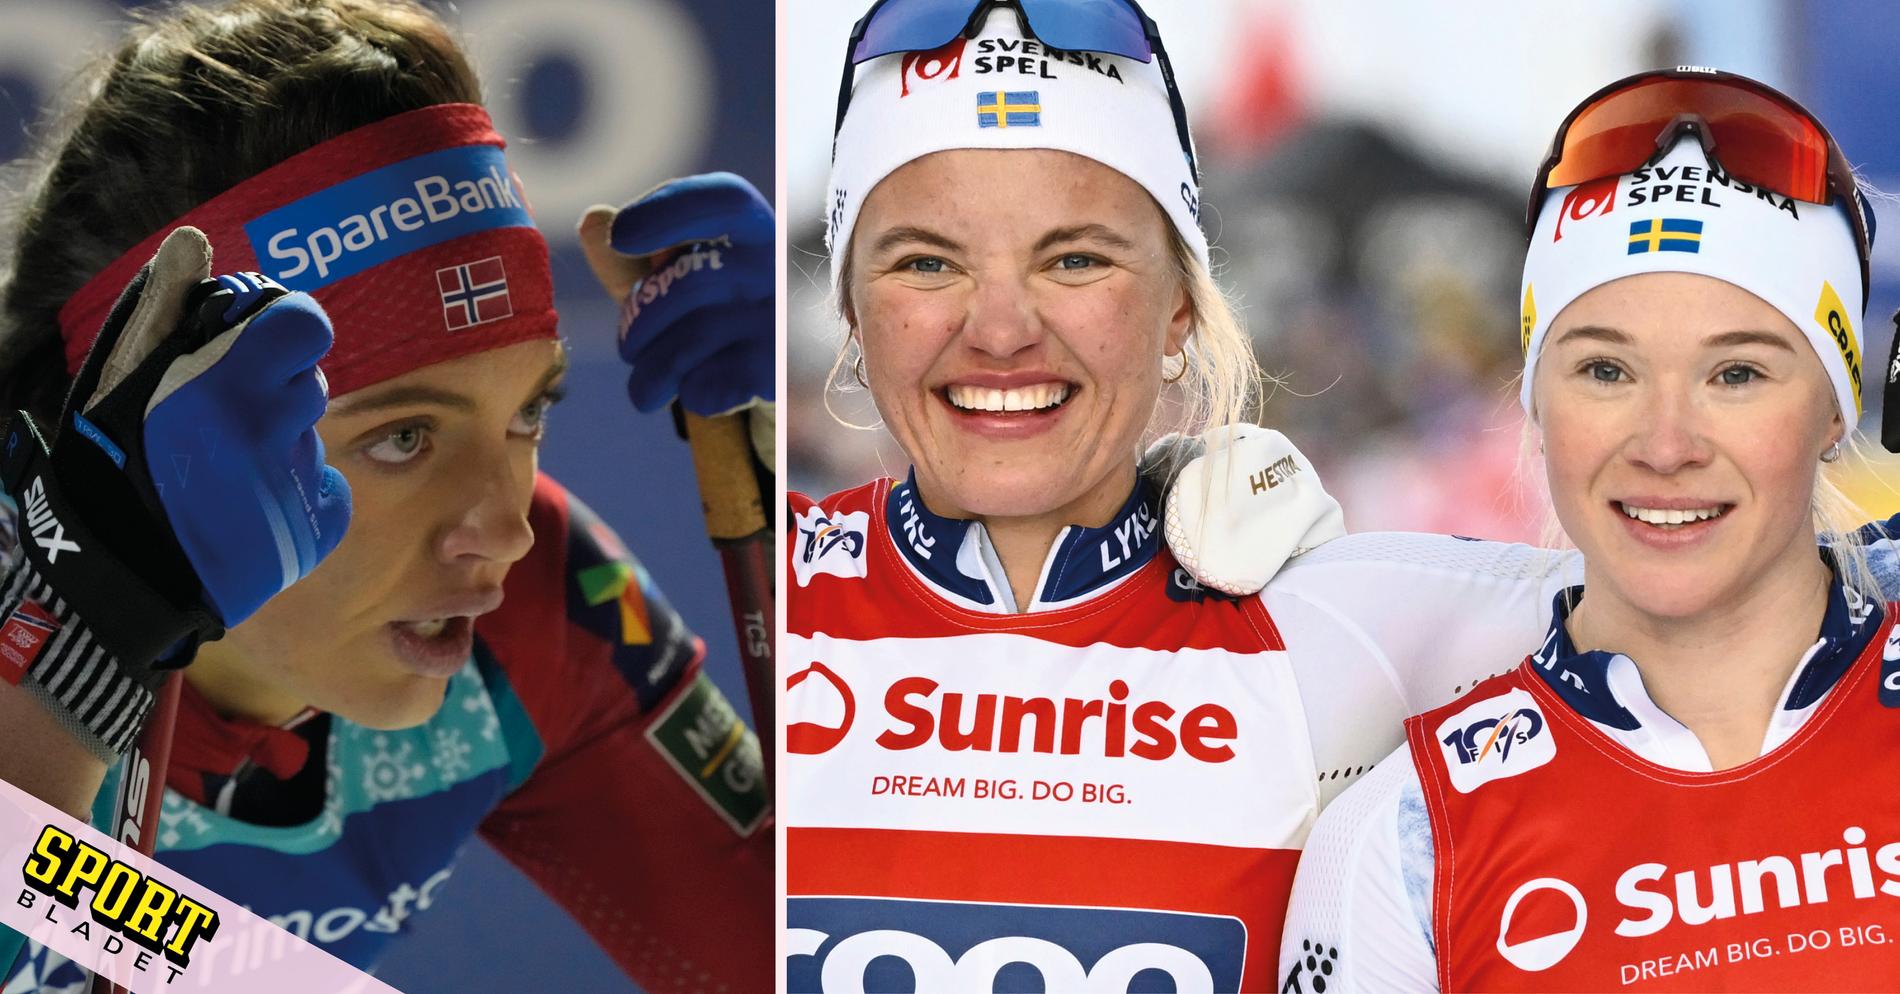 Linn Svahn won the women’s sprint in the World Cup in Canmore